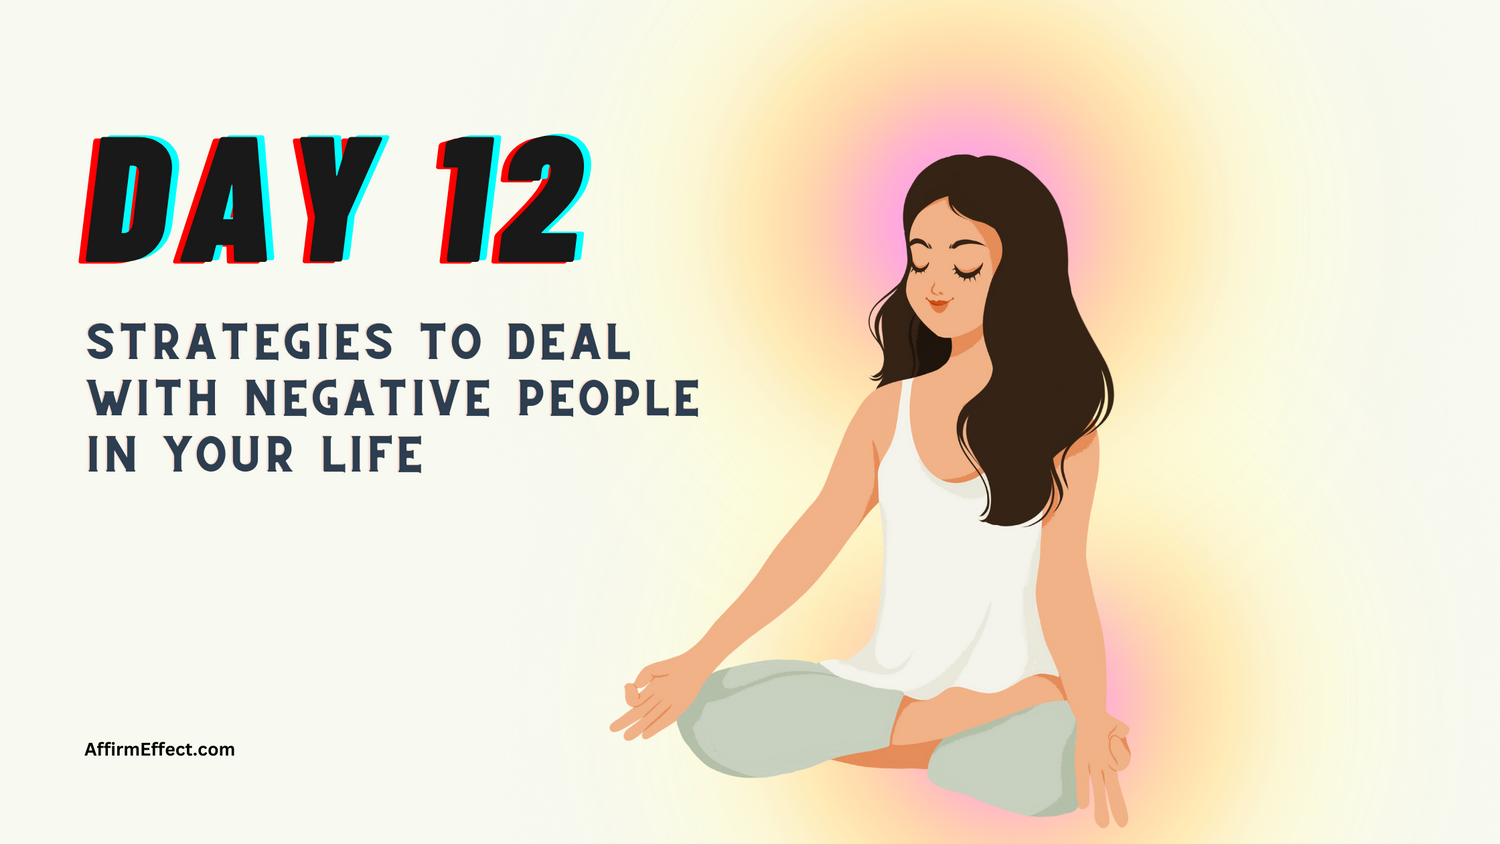 Day 12: Strategies to Deal with Negative People in Your Life